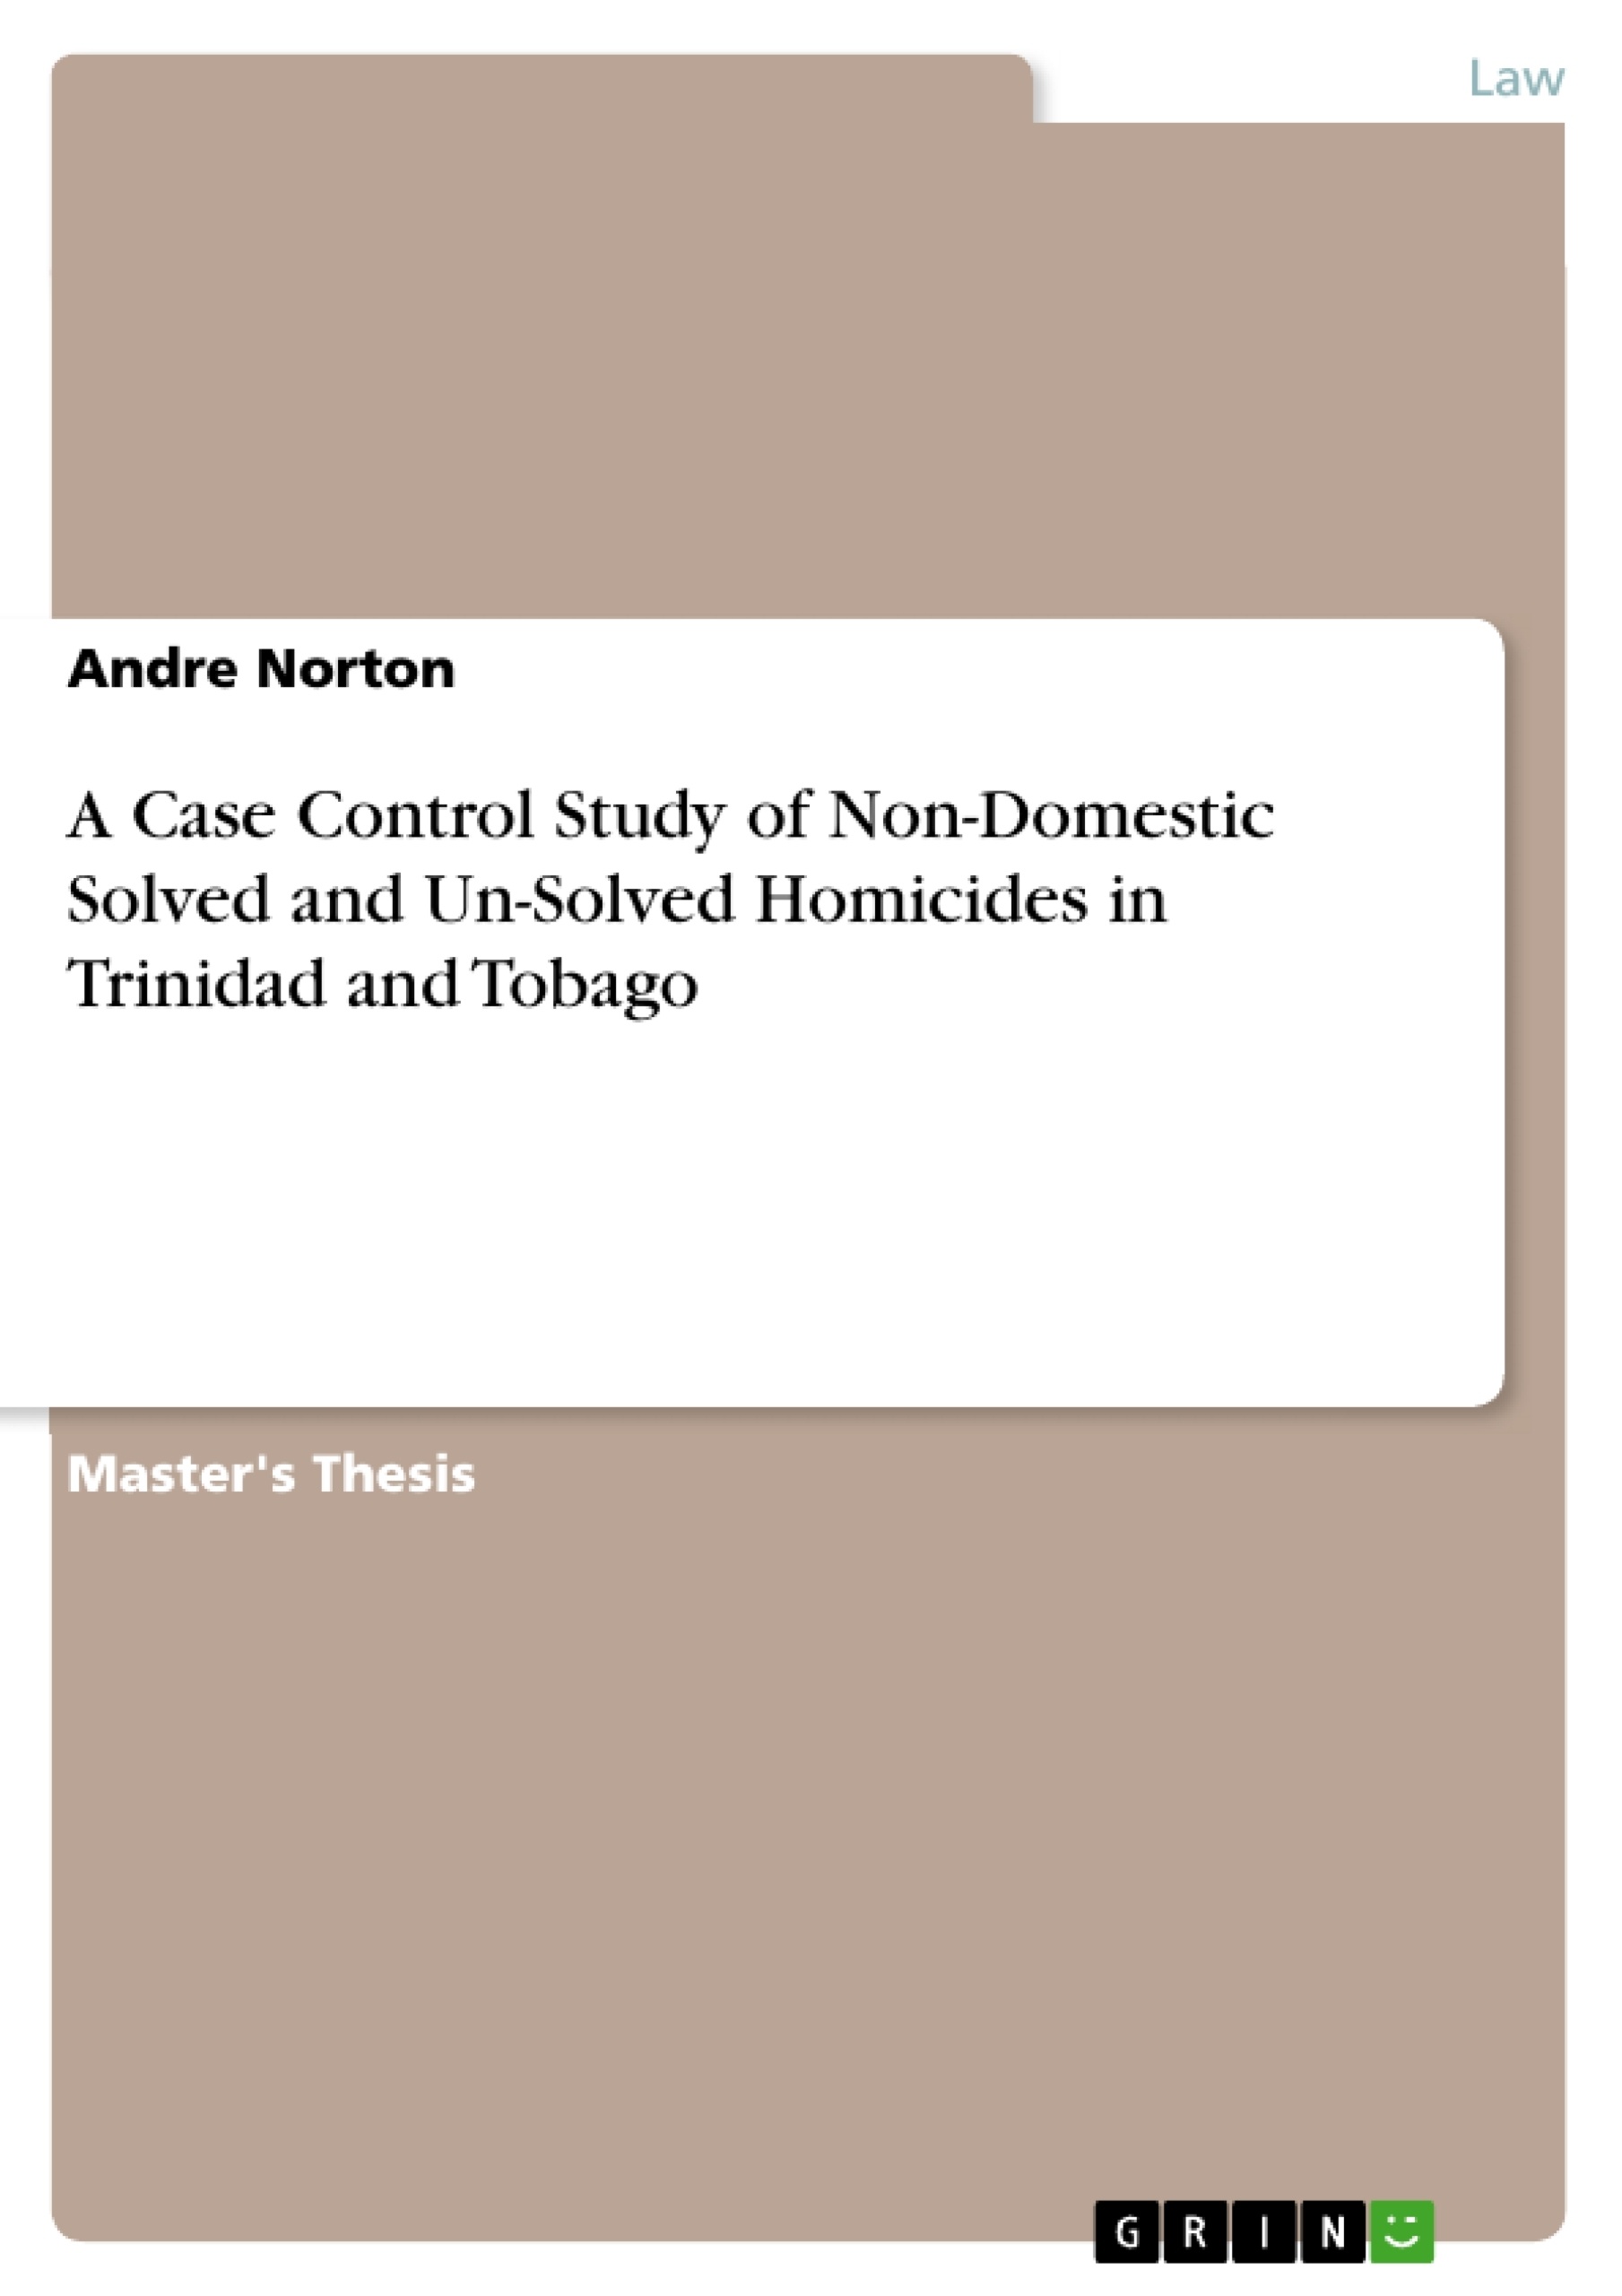 Title: A Case Control Study of Non-Domestic Solved and Un-Solved Homicides in Trinidad and Tobago